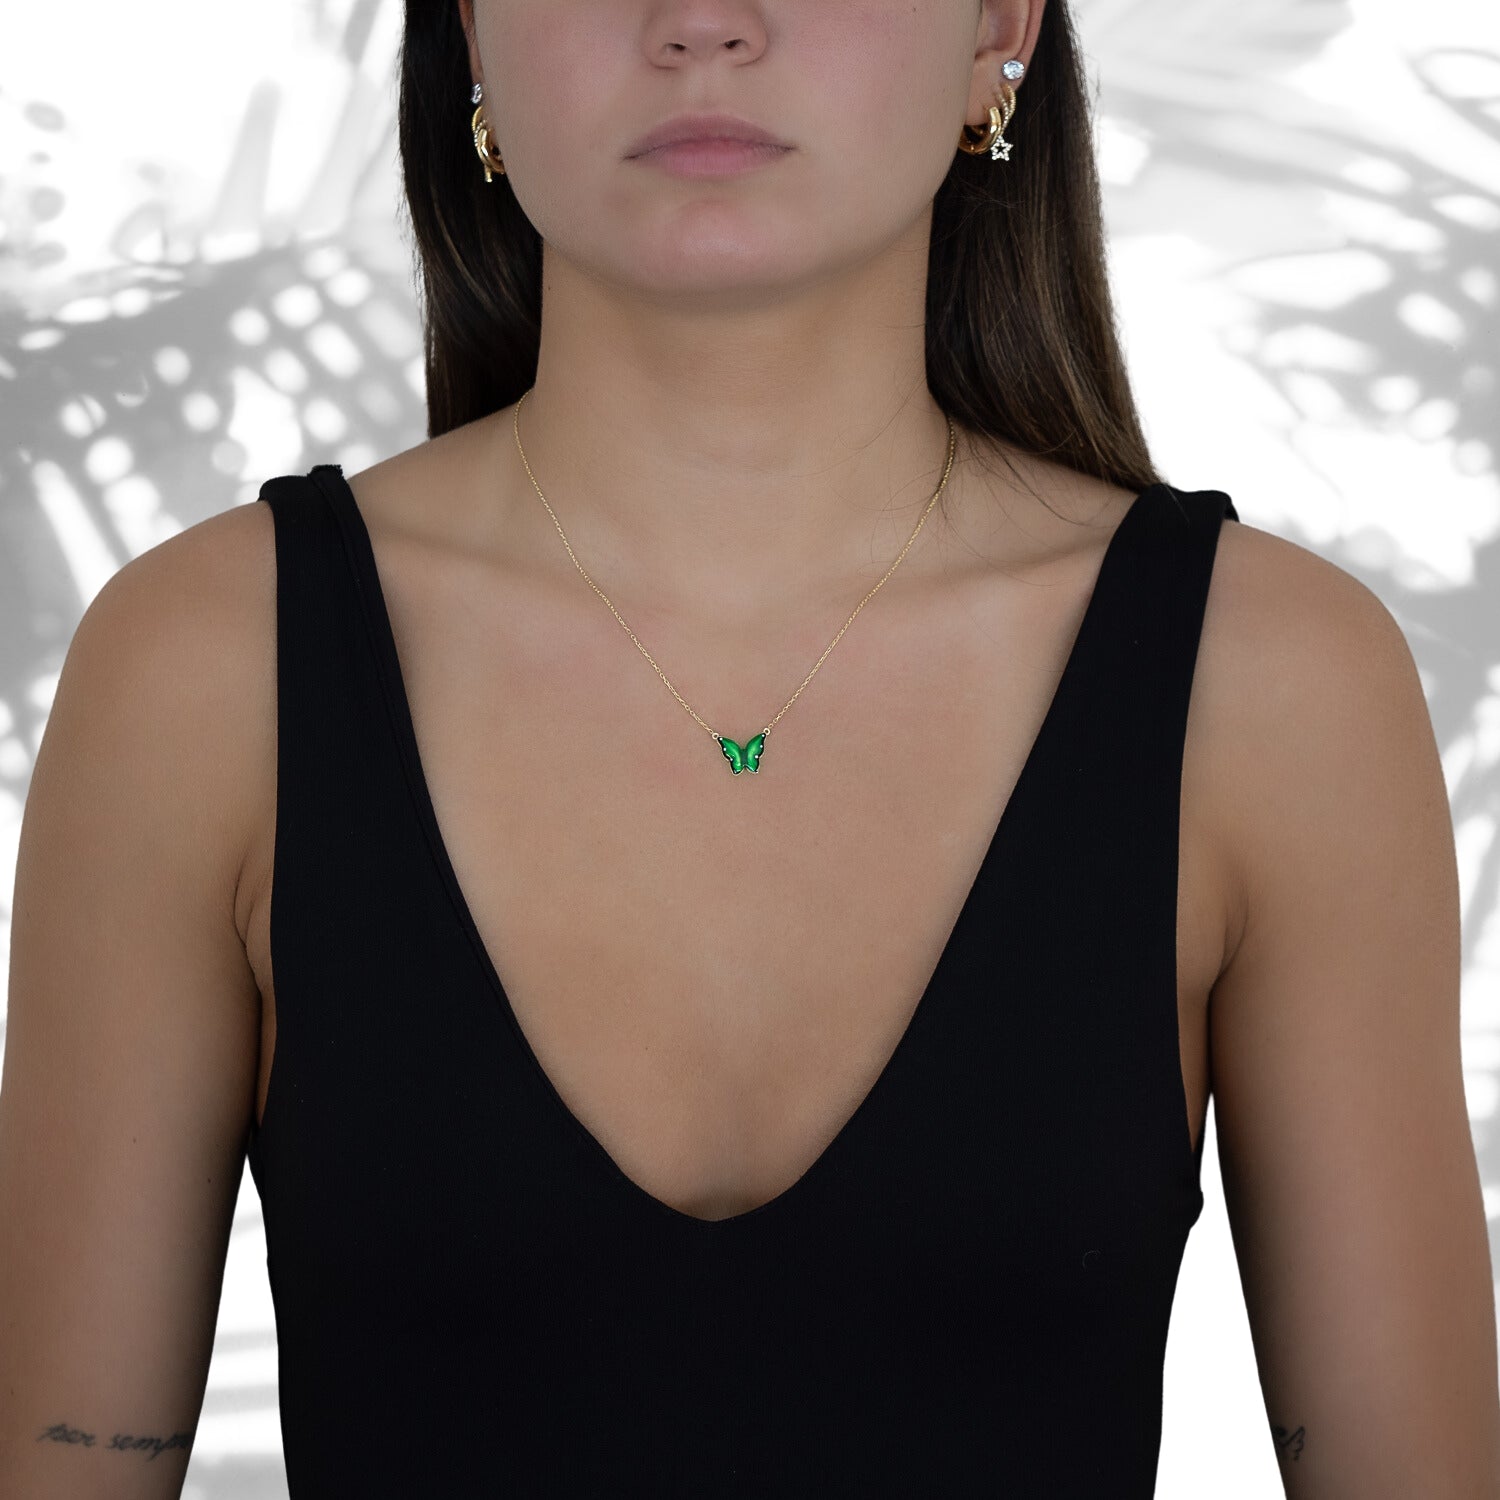 Stylish shot of a model wearing the Gold Abundance Green Enamel Butterfly Necklace, radiating confidence and showcasing its spiritual and aesthetic appeal.